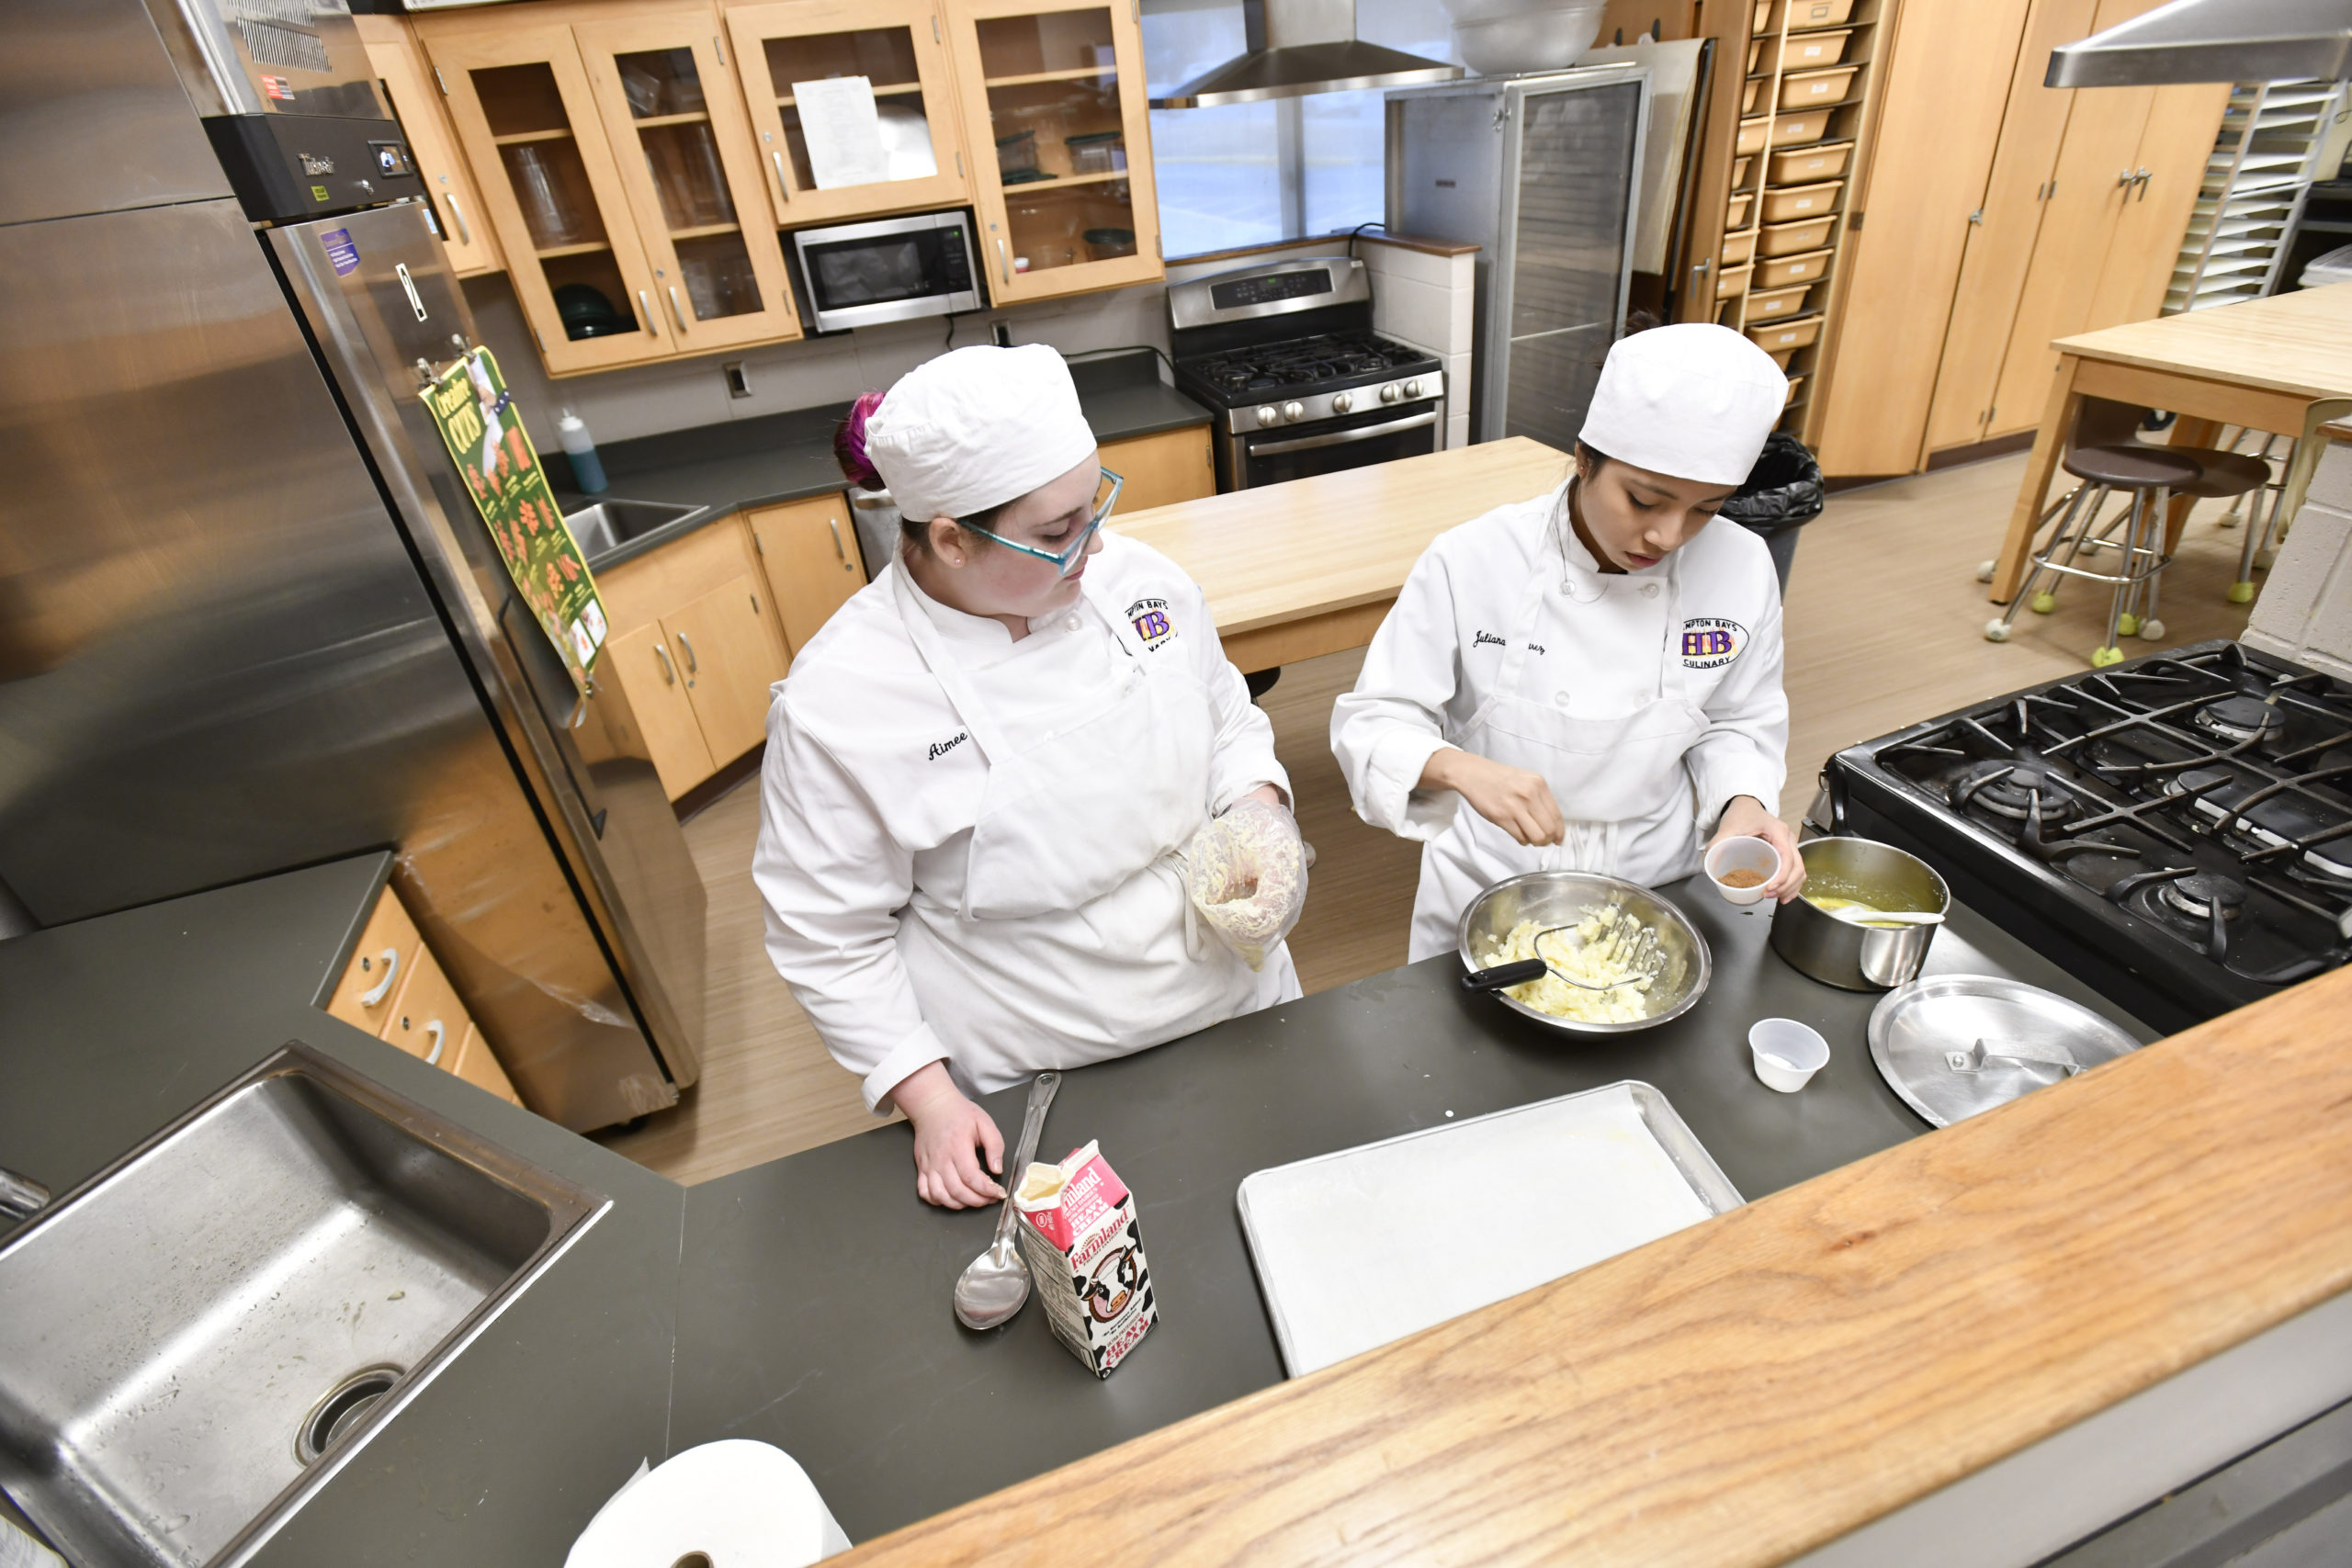 Students Aimee Pelletier and Juliana Alvarez work on and assignment during the culinary class at Hampton Bays High School. DANA SHAW